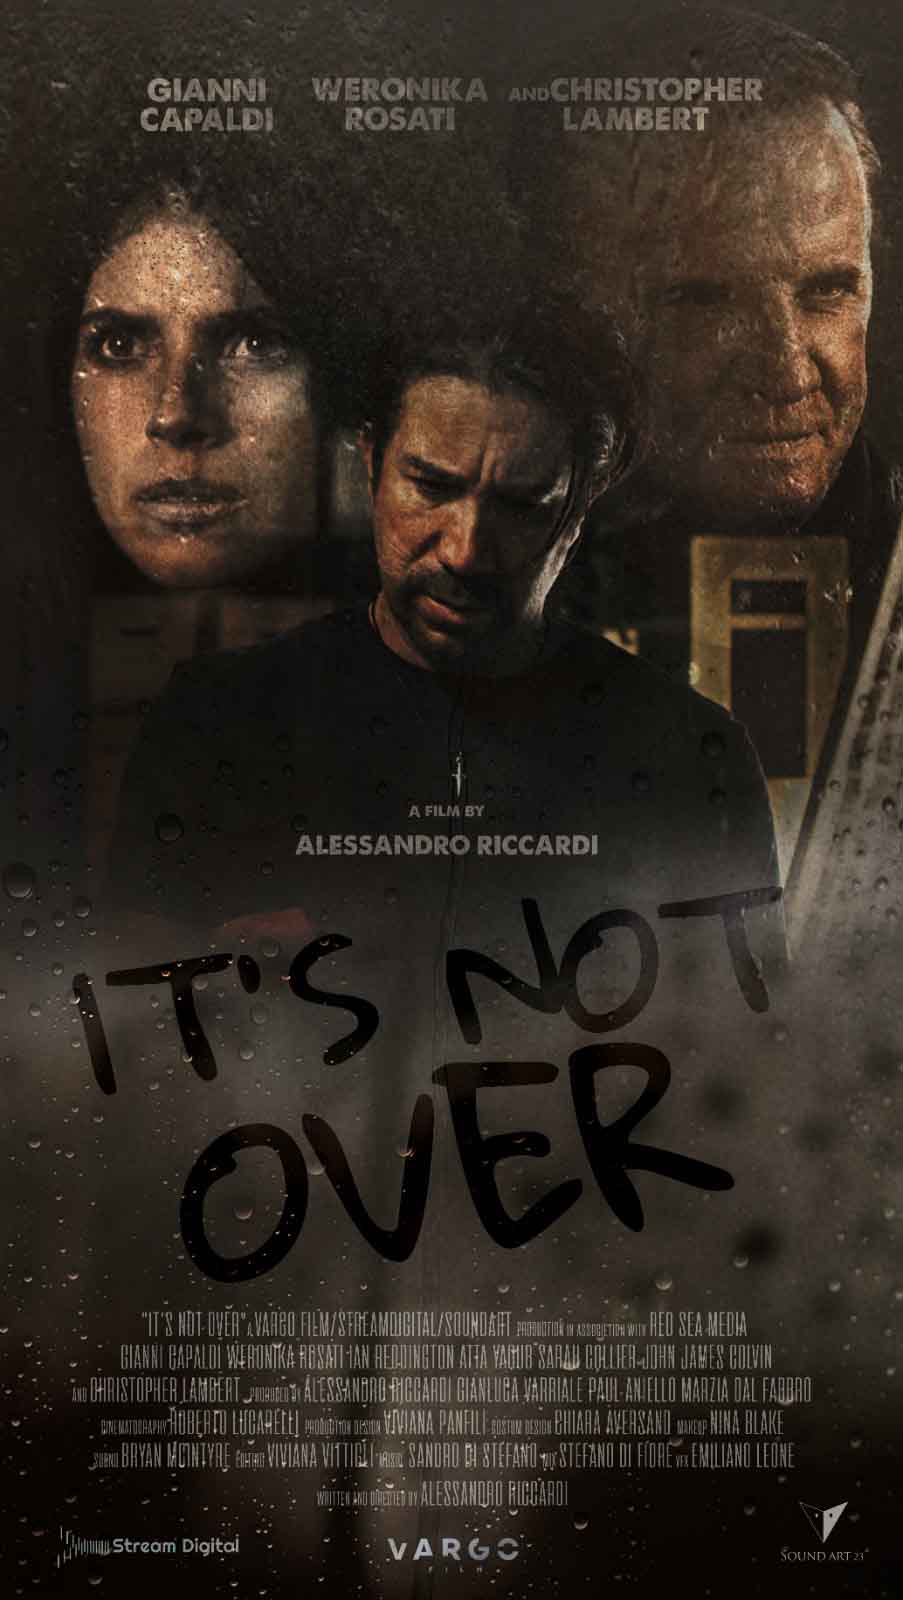 It's not over - locandina ufficiale